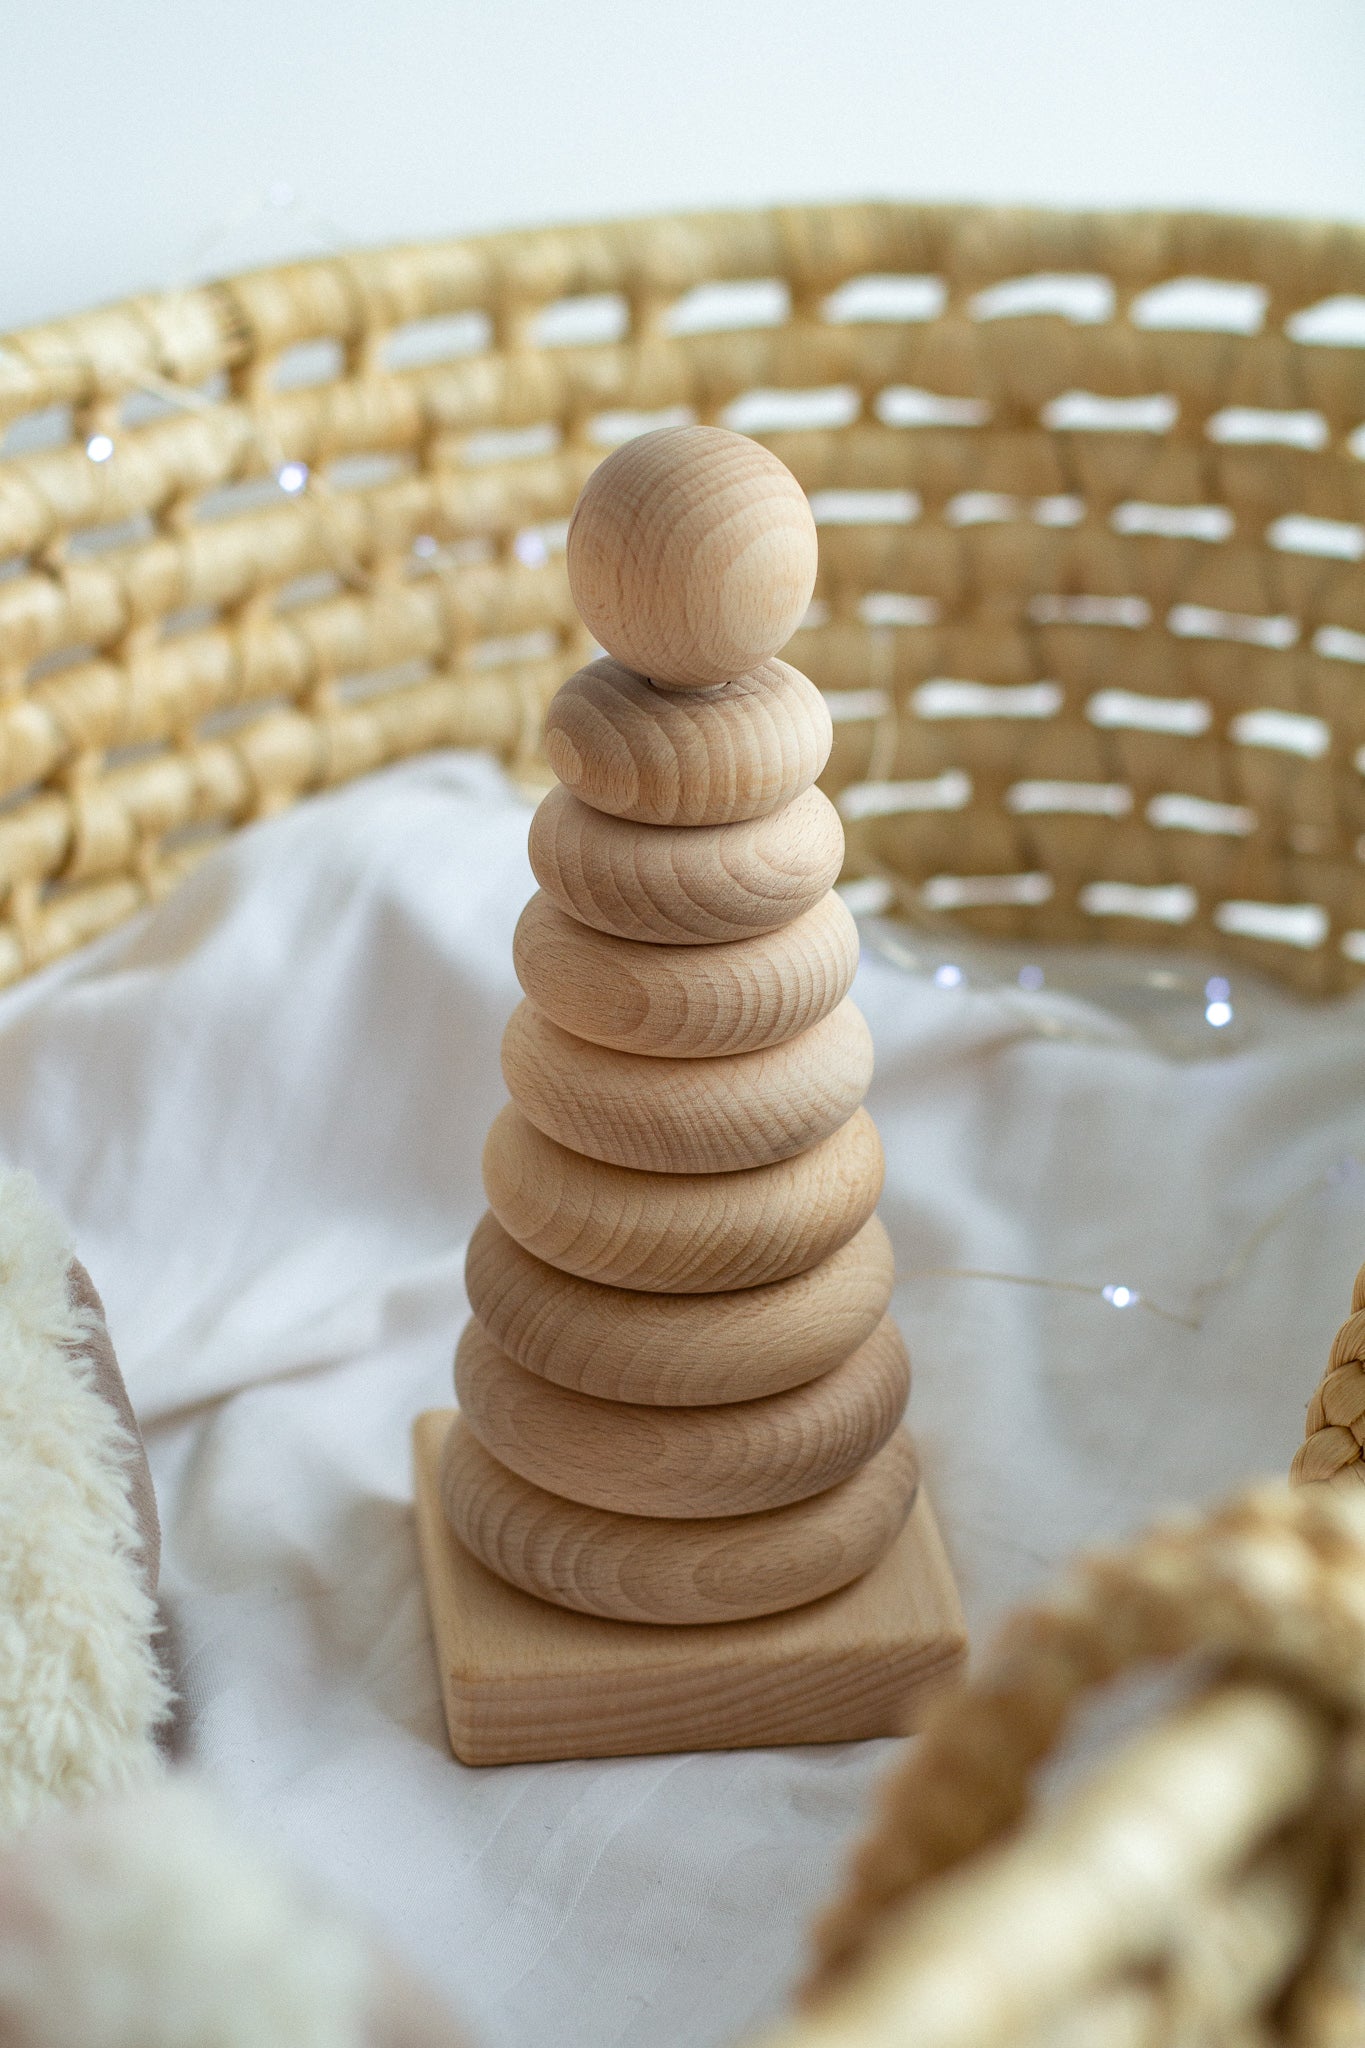 Wooden Ring Pyramid Tower